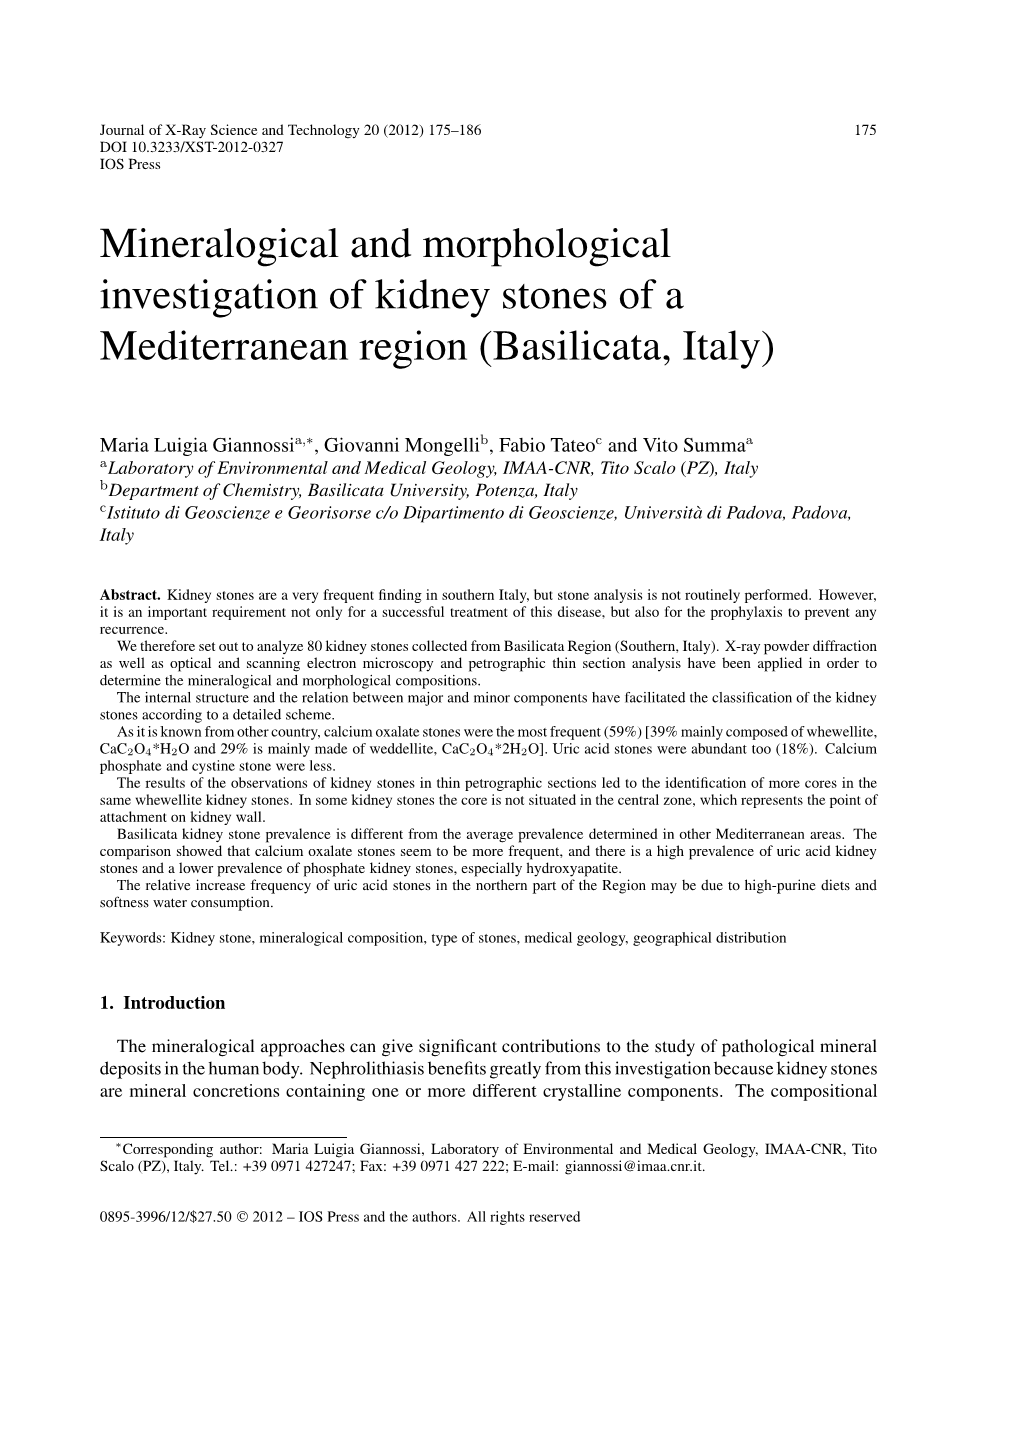 Mineralogical and Morphological Investigation of Kidney Stones of a Mediterranean Region (Basilicata, Italy)